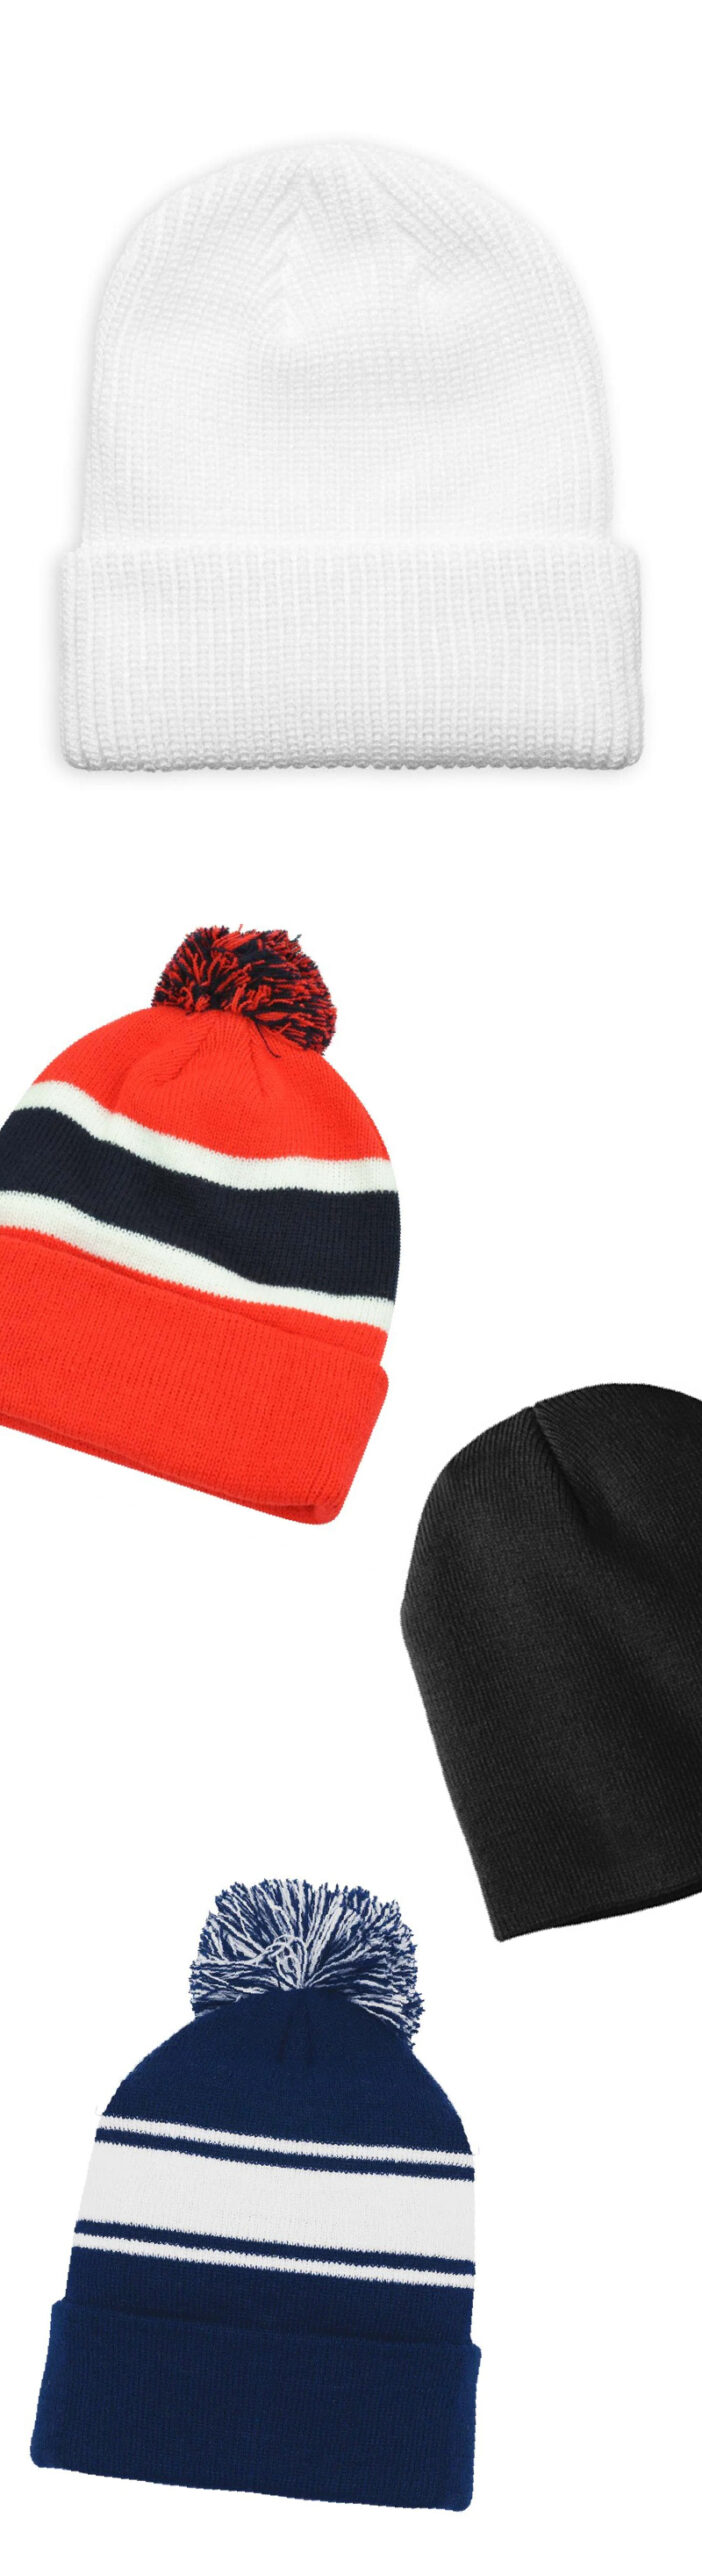 Multiple Beanies: Stay Cozy and Fashionable